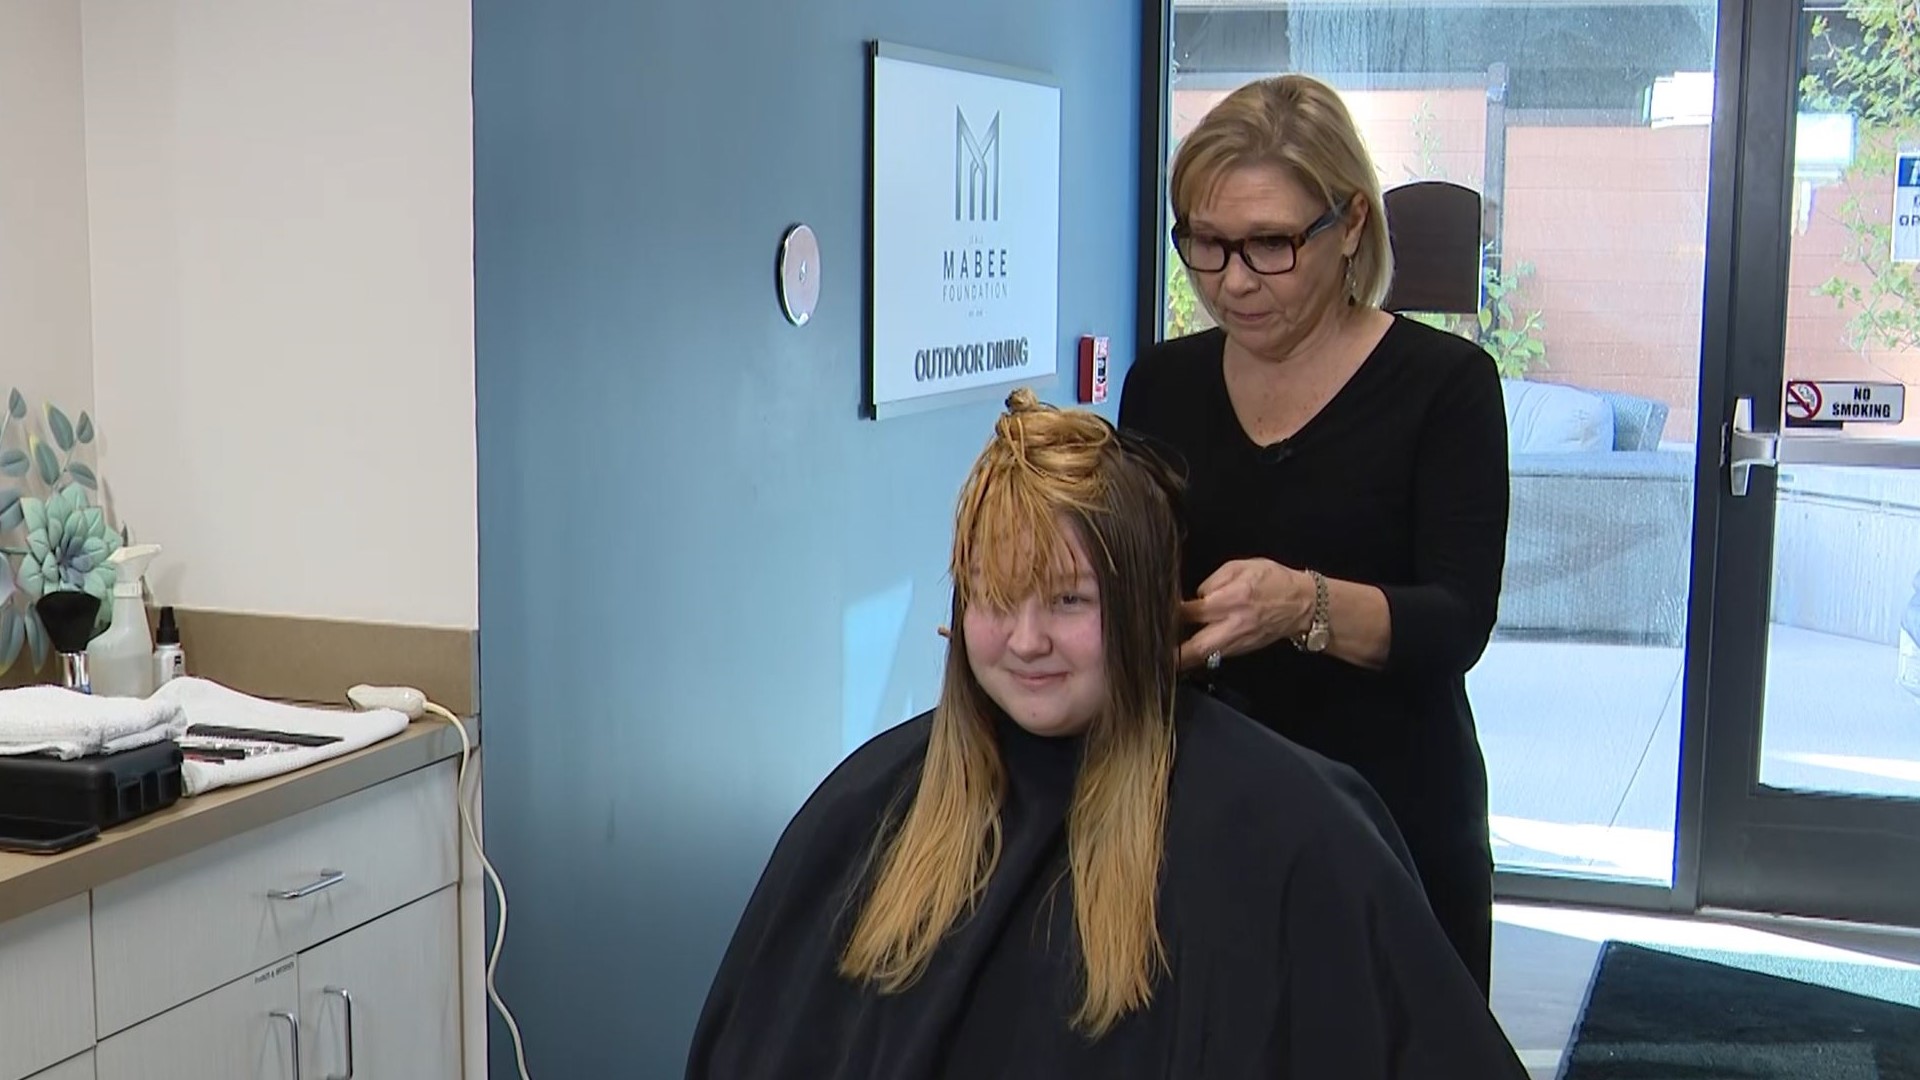 A hairstylist goes to a cancer hotel to make cancer patients day better by styling their hair for free.